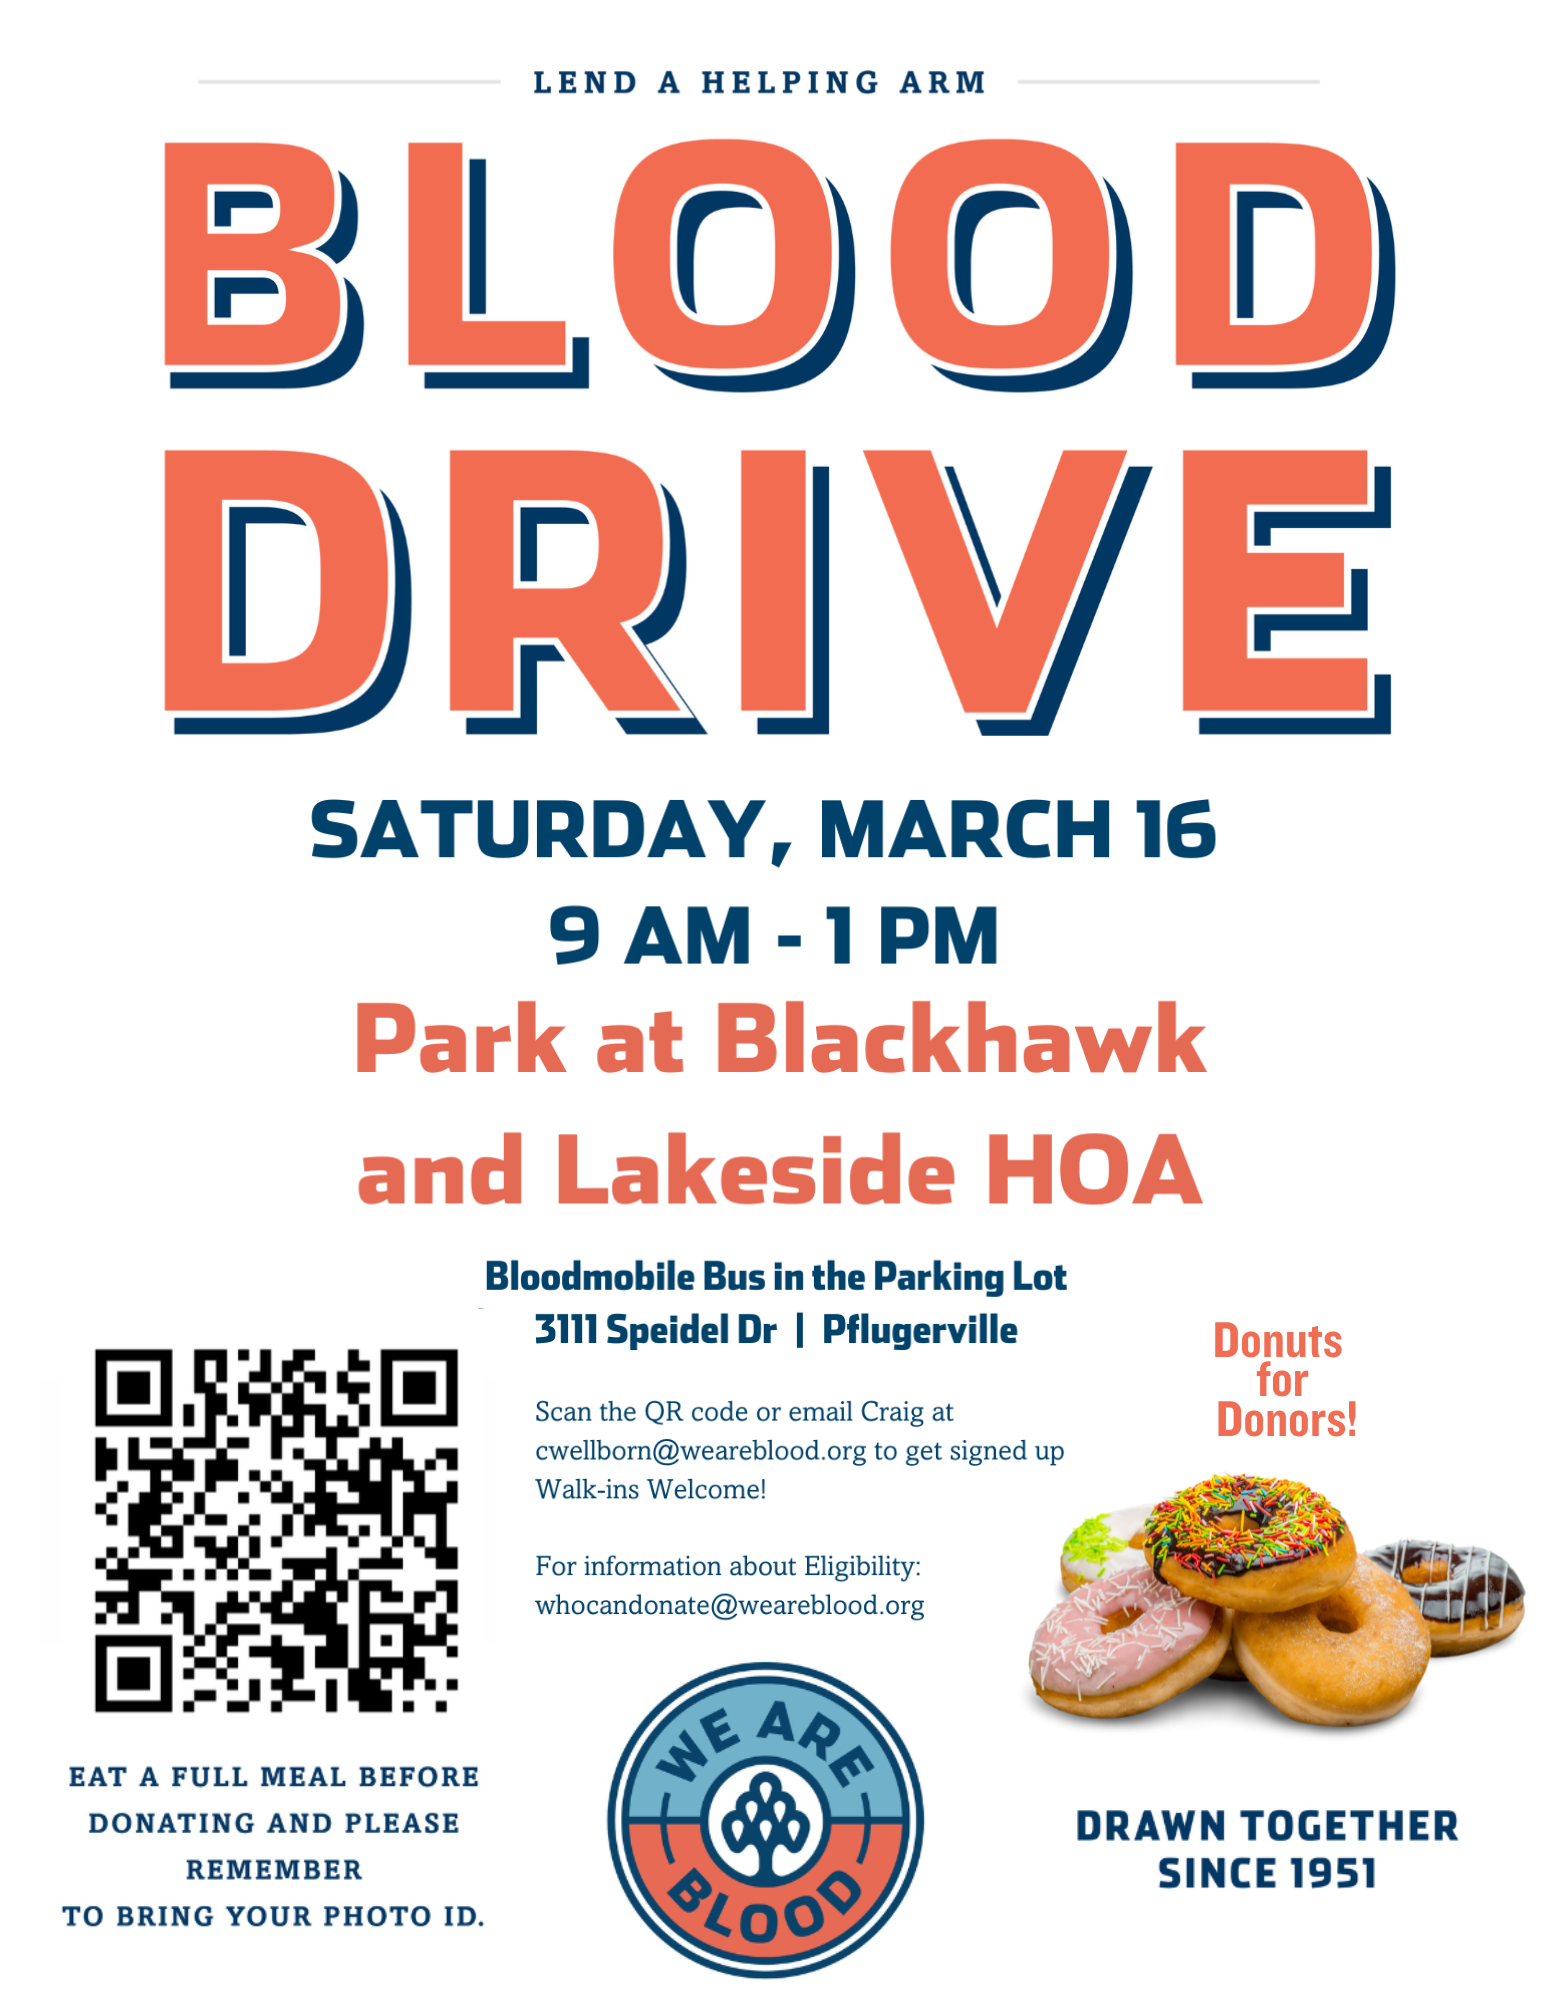 Flyer for a blood donation event titled 'BLOOD DRIVE' with a tagline 'LEND A HELPING ARM', scheduled for Saturday, March 16, from 9 AM to 1 PM at the Park at Blackhawk and Lakeside HOA. Details include the address 3111 Speidel Dr, Pflugerville, and mentions a Bloodmobile Bus in the parking lot. The flyer advises to eat a full meal before donating and to bring a photo ID. It also offers 'Donuts for Donors' and includes a QR code for registration, an email address for sign-up, and another email for eligibility inquiries. The 'We Are Blood' logo is displayed, with the slogan 'DRAWN TOGETHER SINCE 1951'.